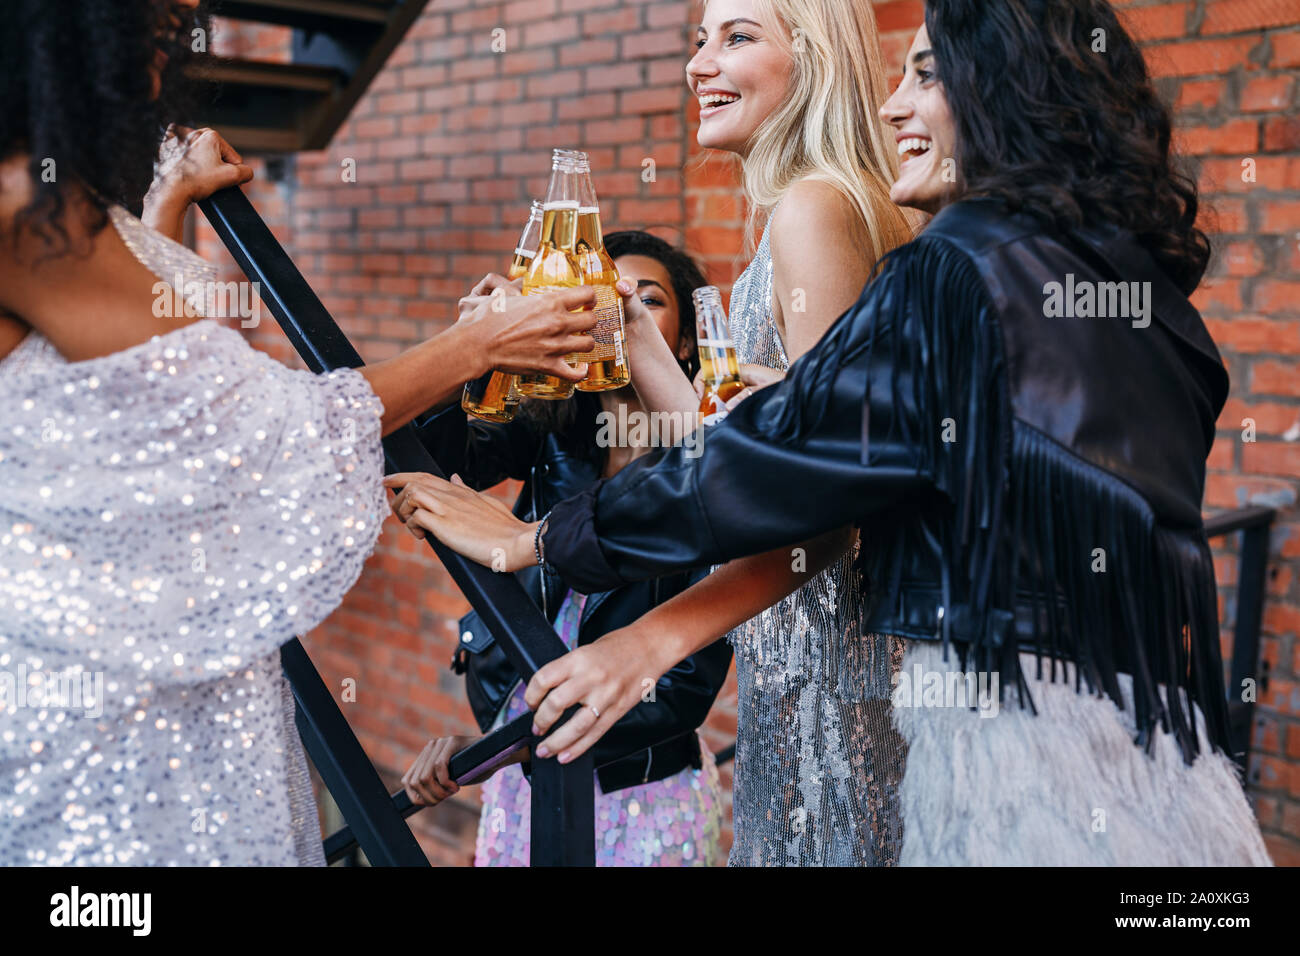 Group of women having drinks together. Female friends toasting with beer bottles while walking in the city. Stock Photo